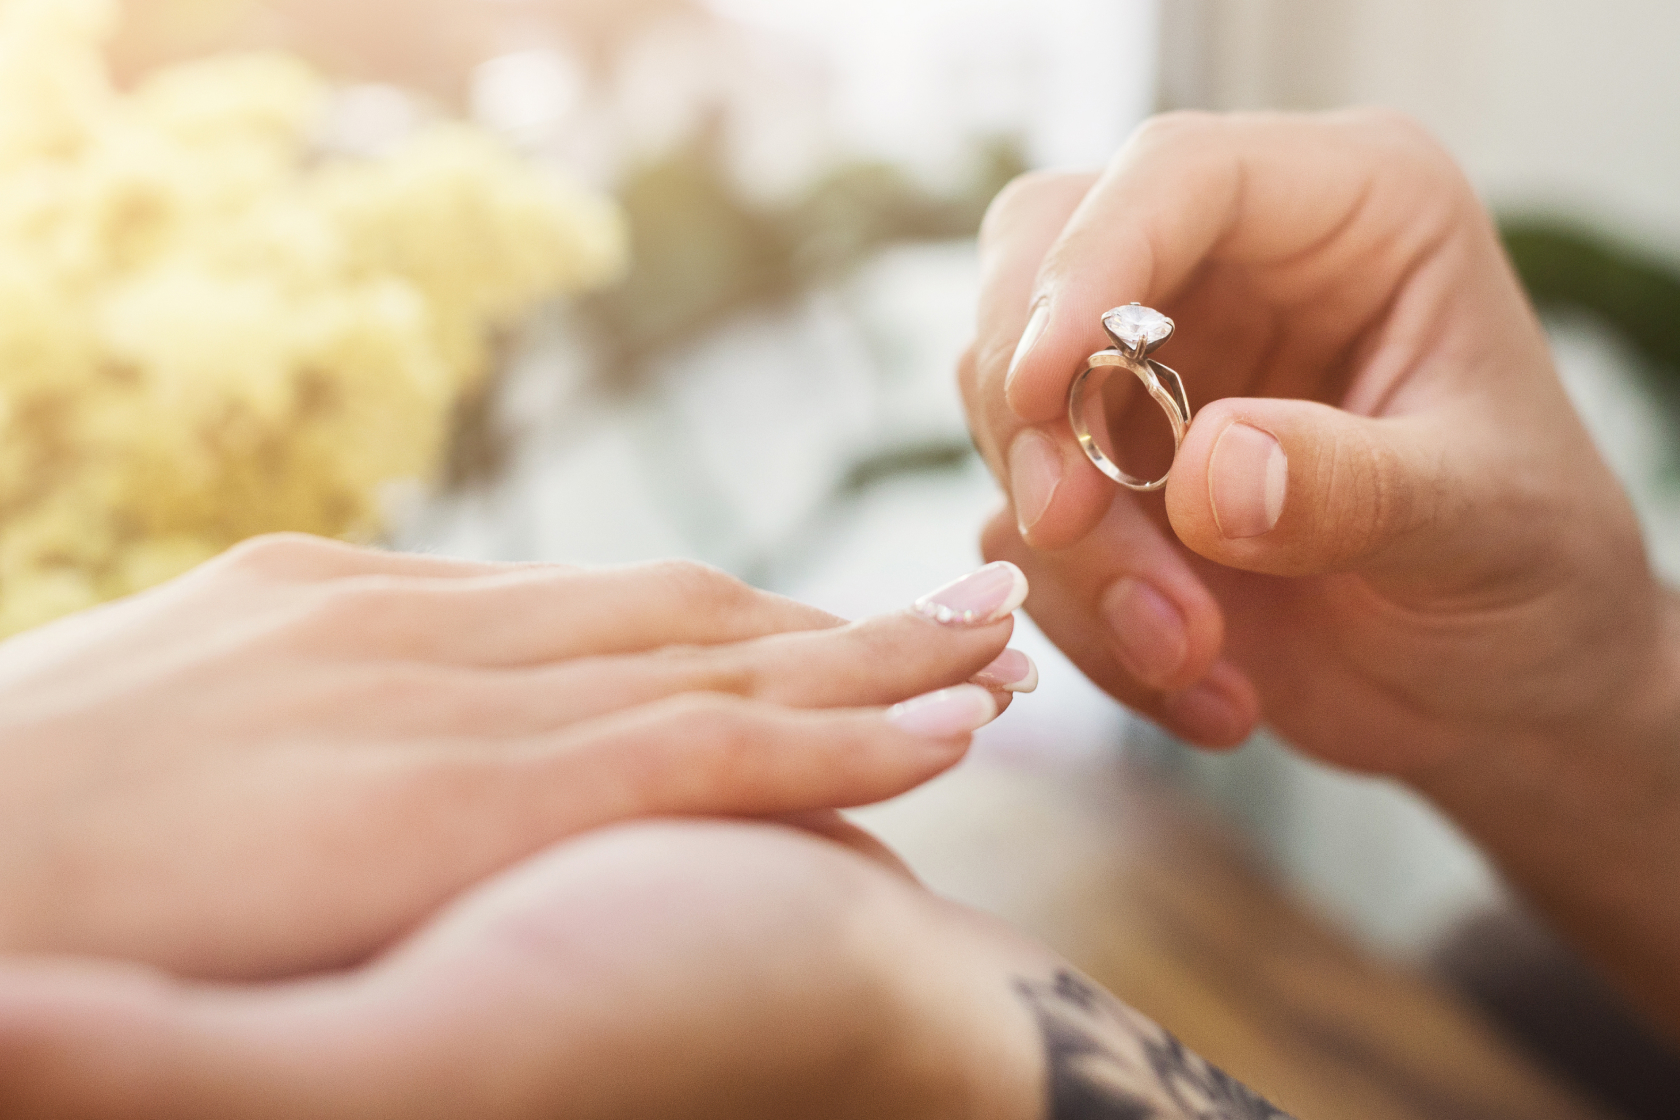 A person places a diamond engagement ring on their significant other's hand. Read about the legal matters you should take care of before you walk down the aisle.